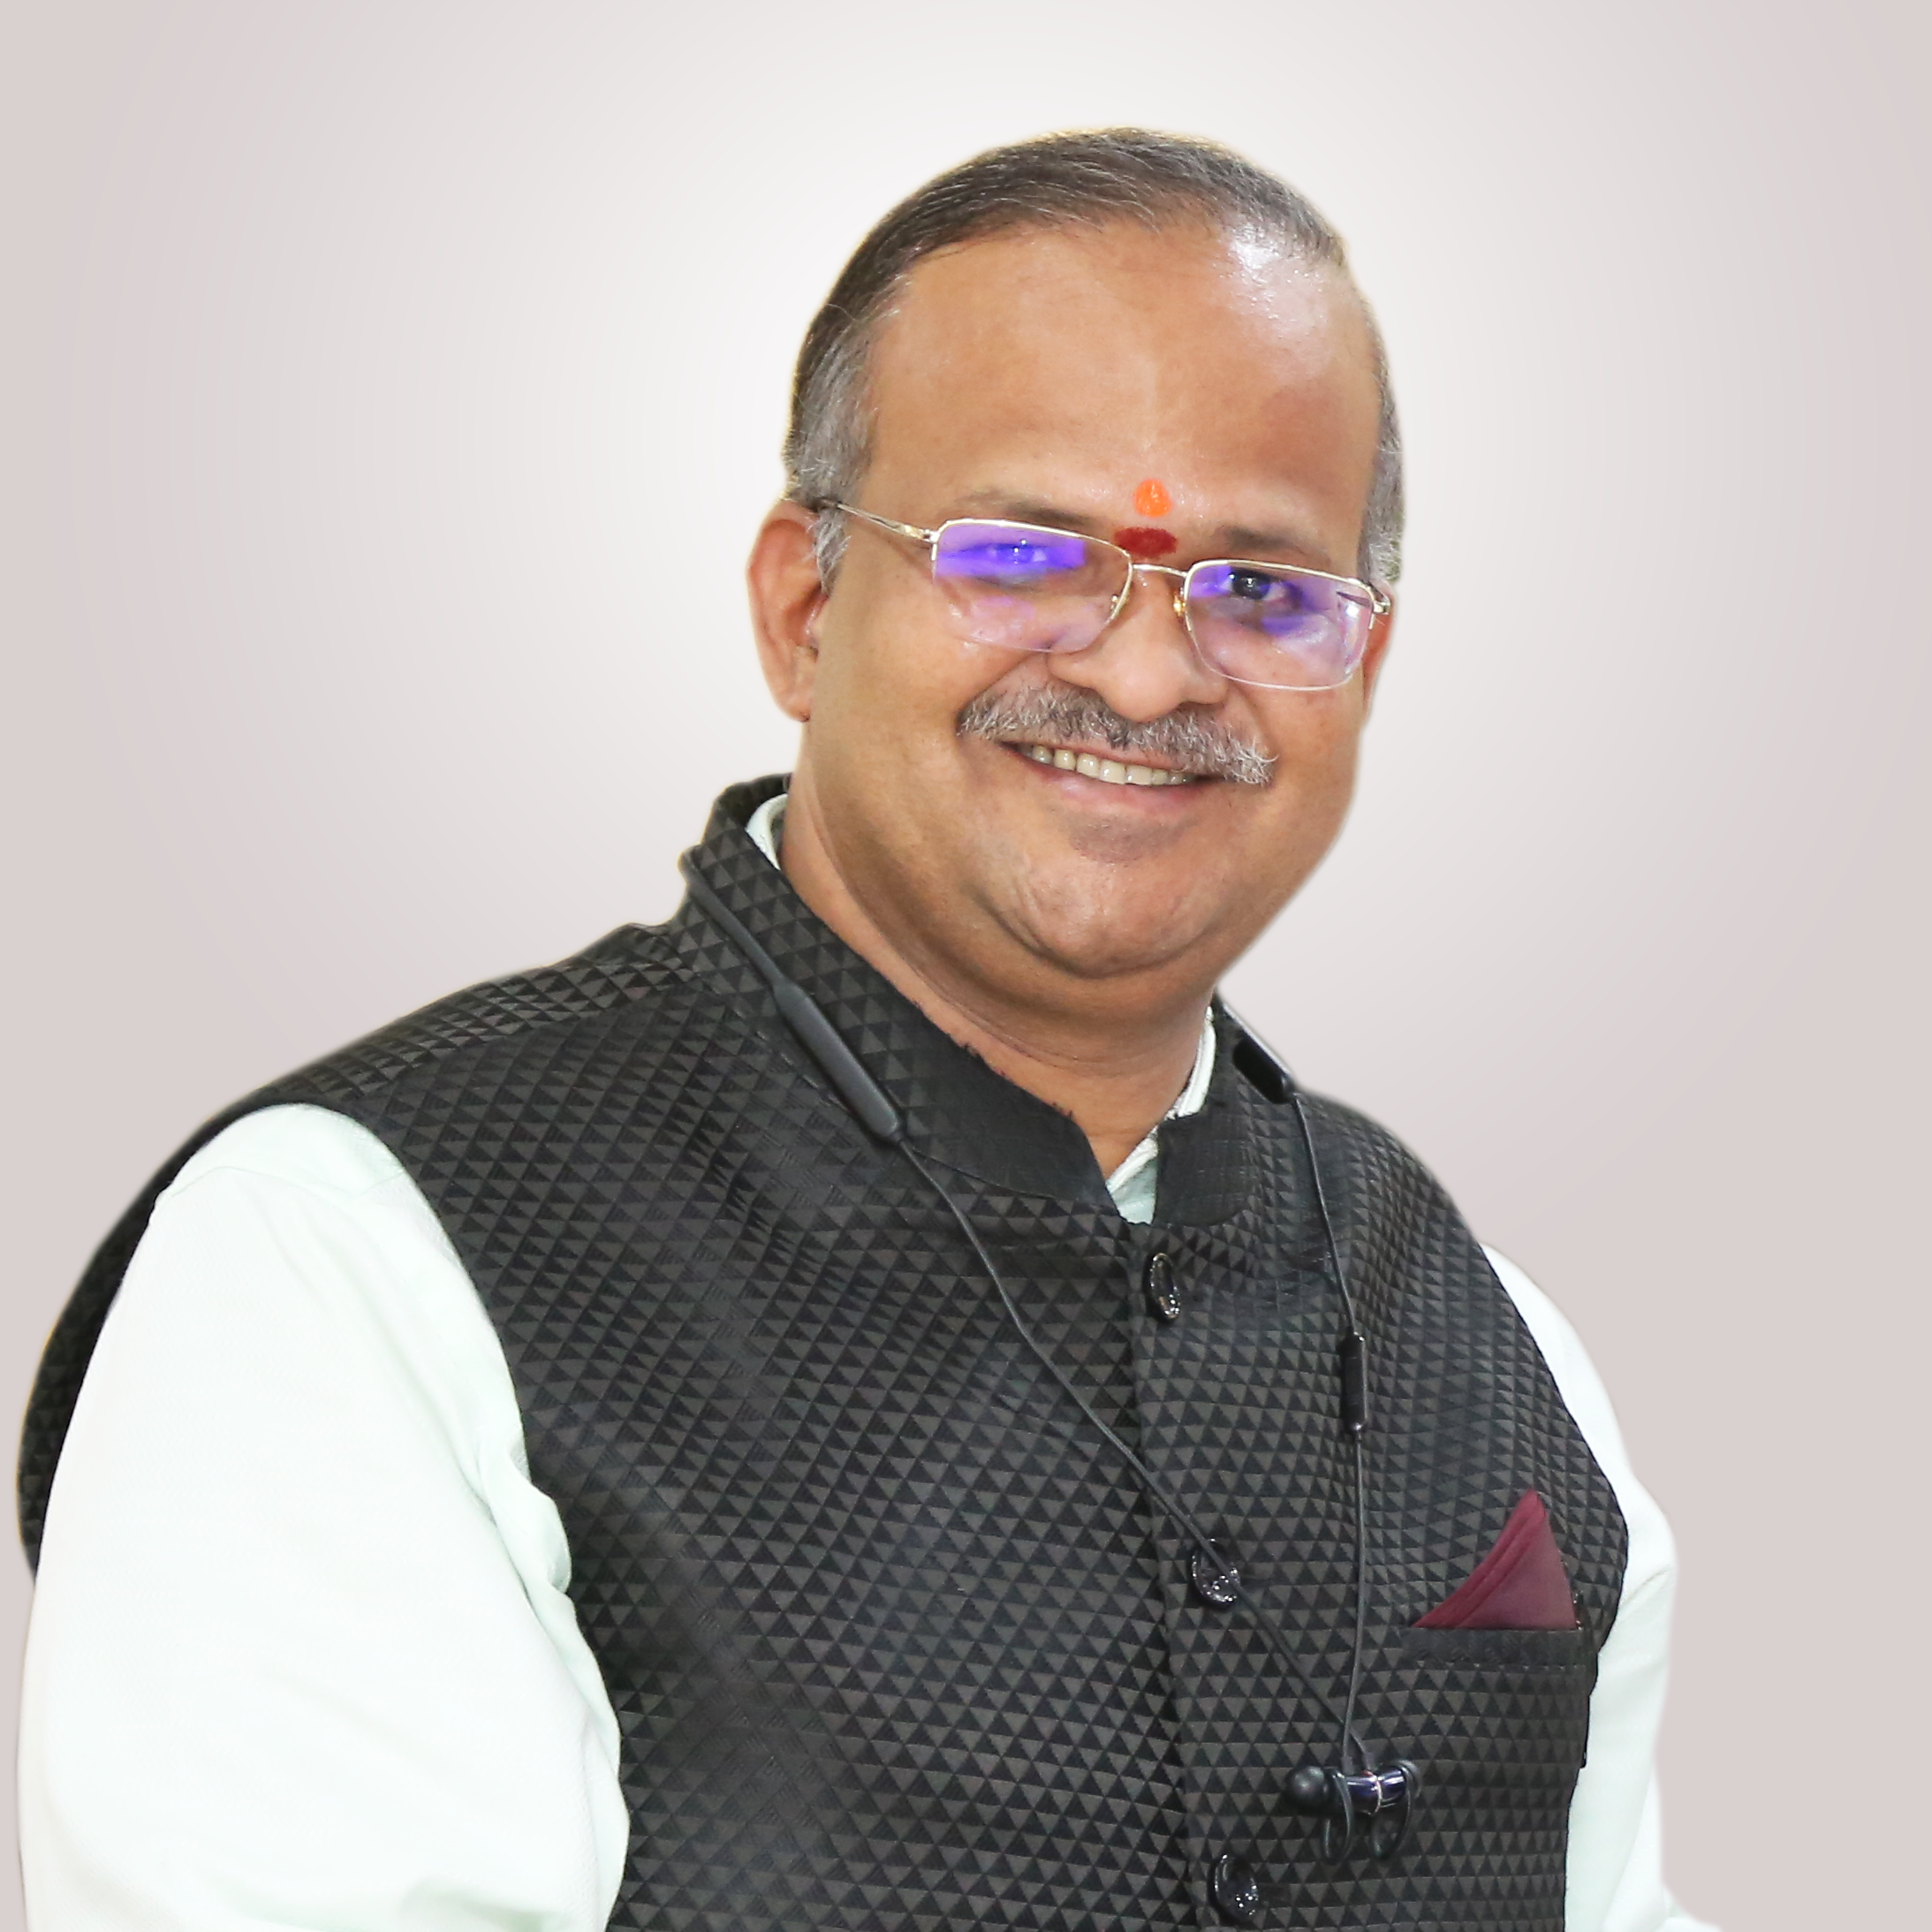 DSN Murthy – CEO & MD